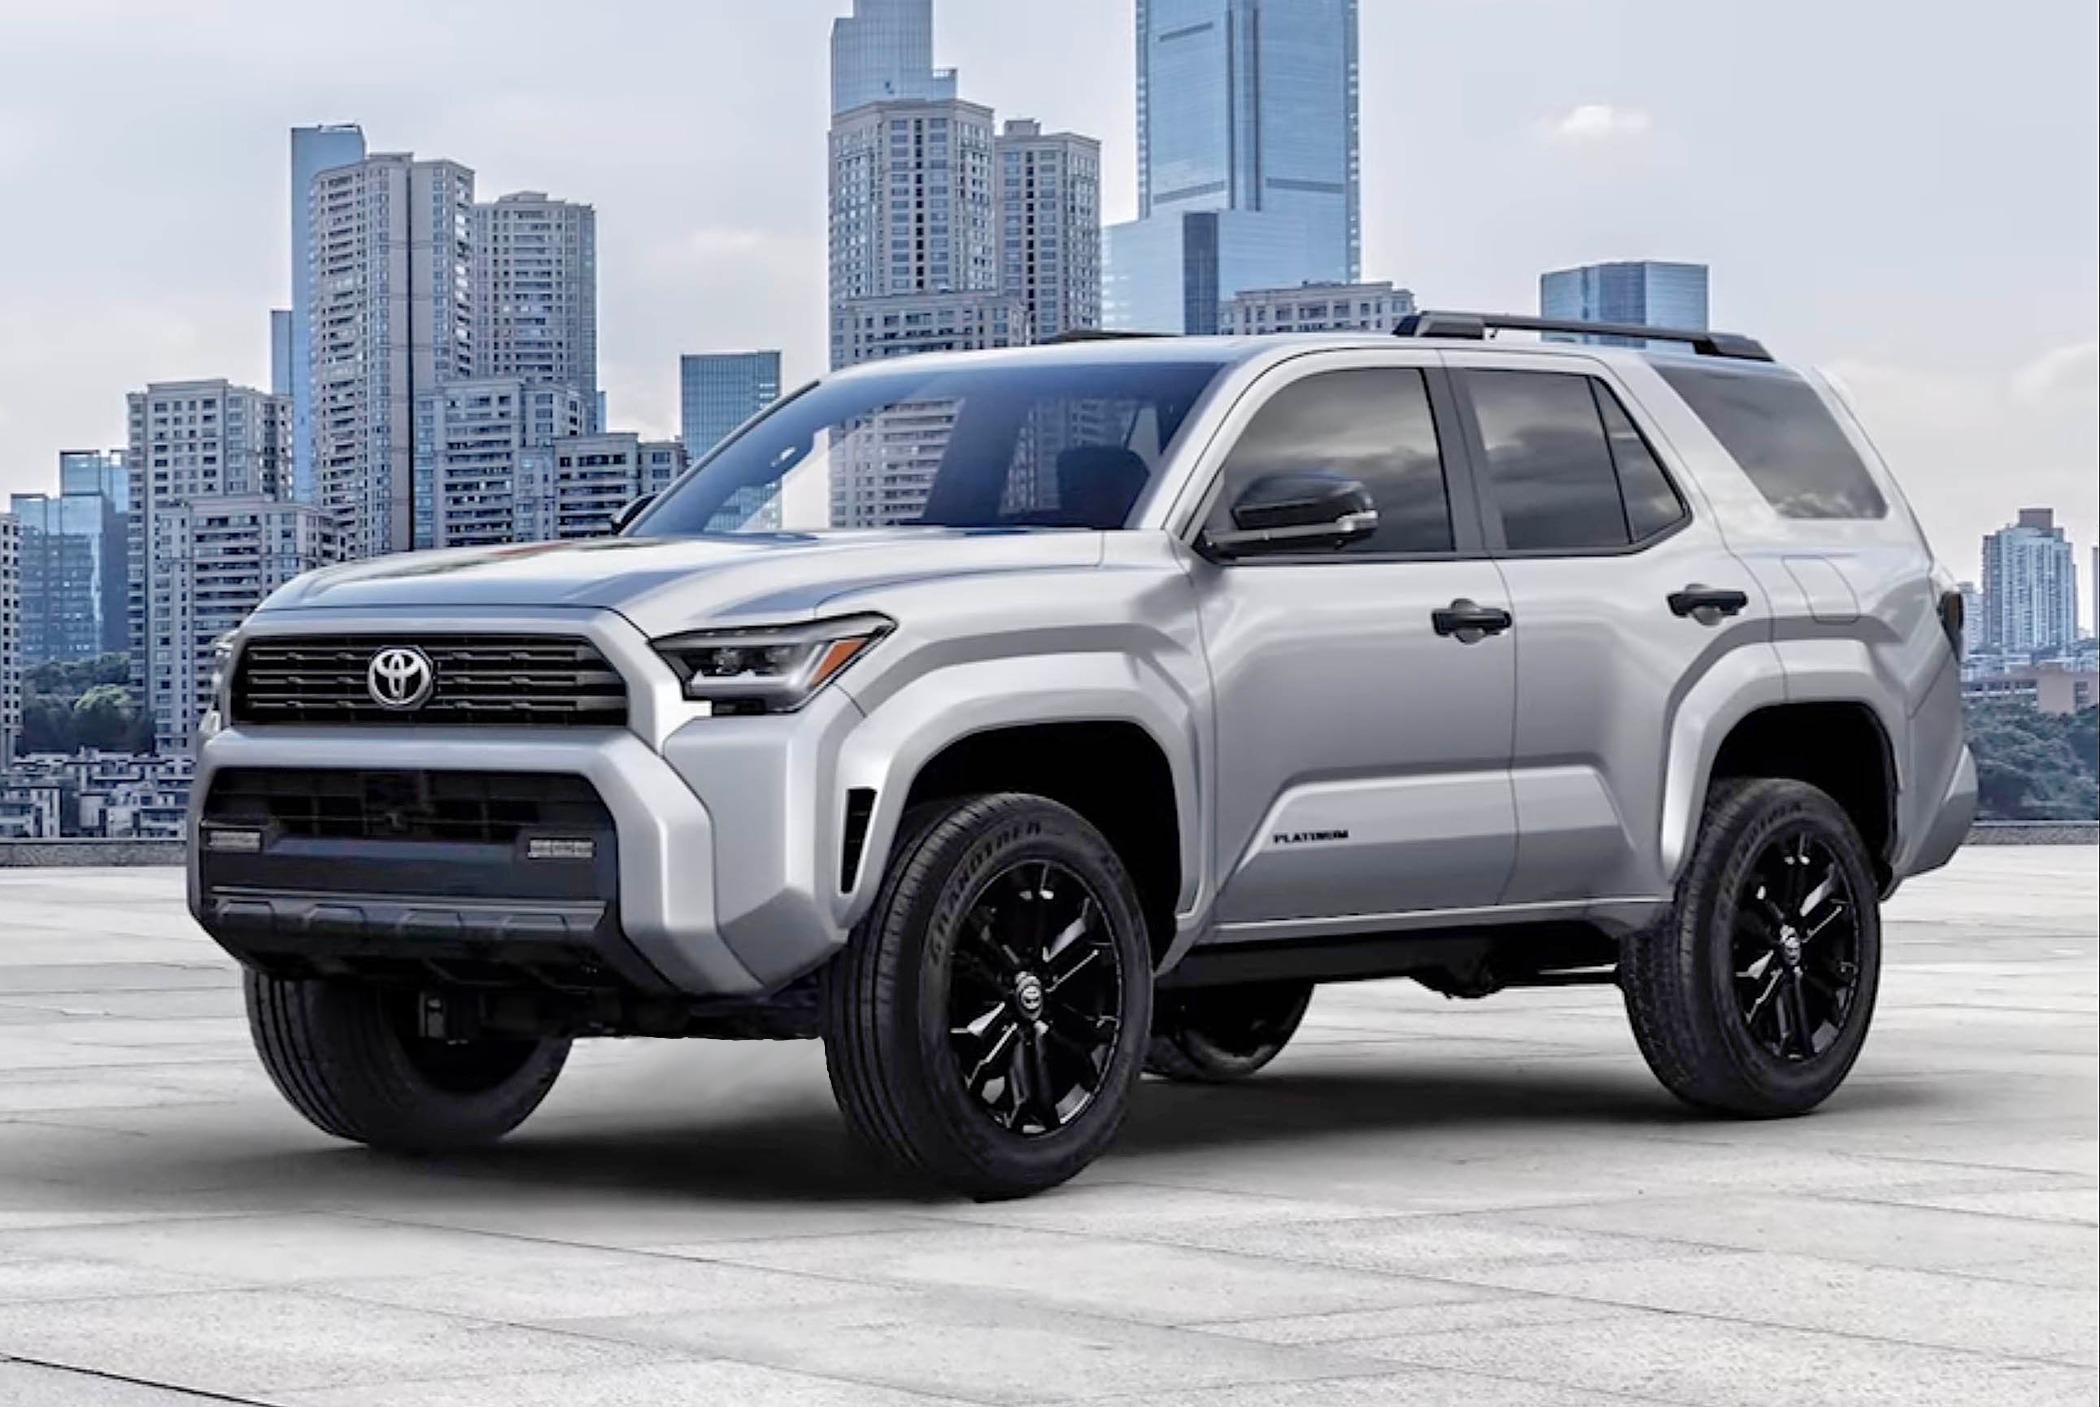 2025 Toyota 4runner PLATINUM 2025 4Runner First Look and Trim Contents + Lifted 6th Gen 4Runner Rendering) 6th gen 2025 4runner Platinum trim model